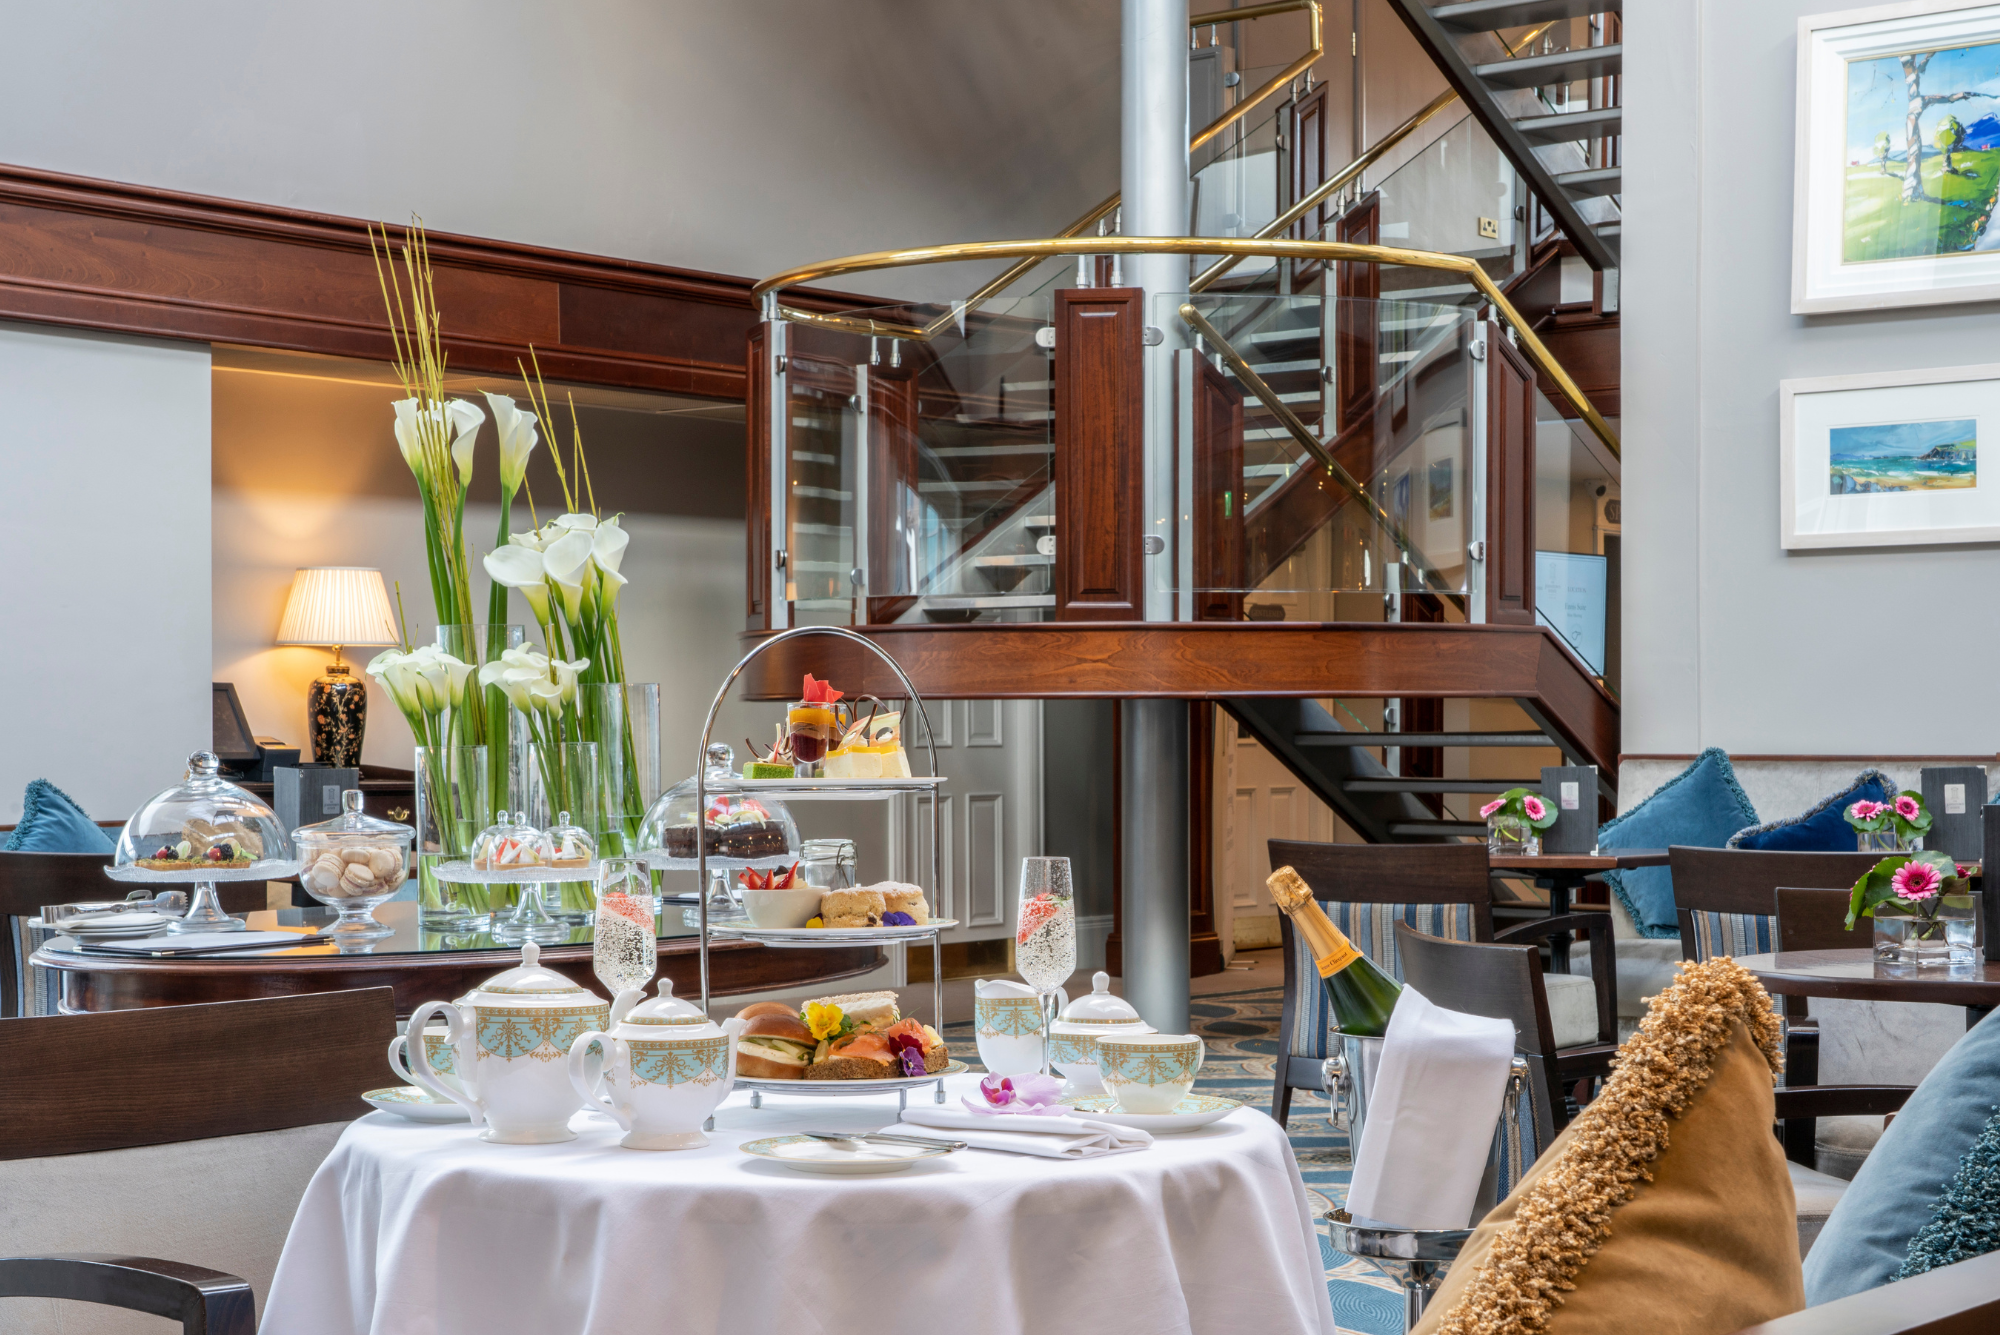 Afternoon Tea for Two with Prosecco